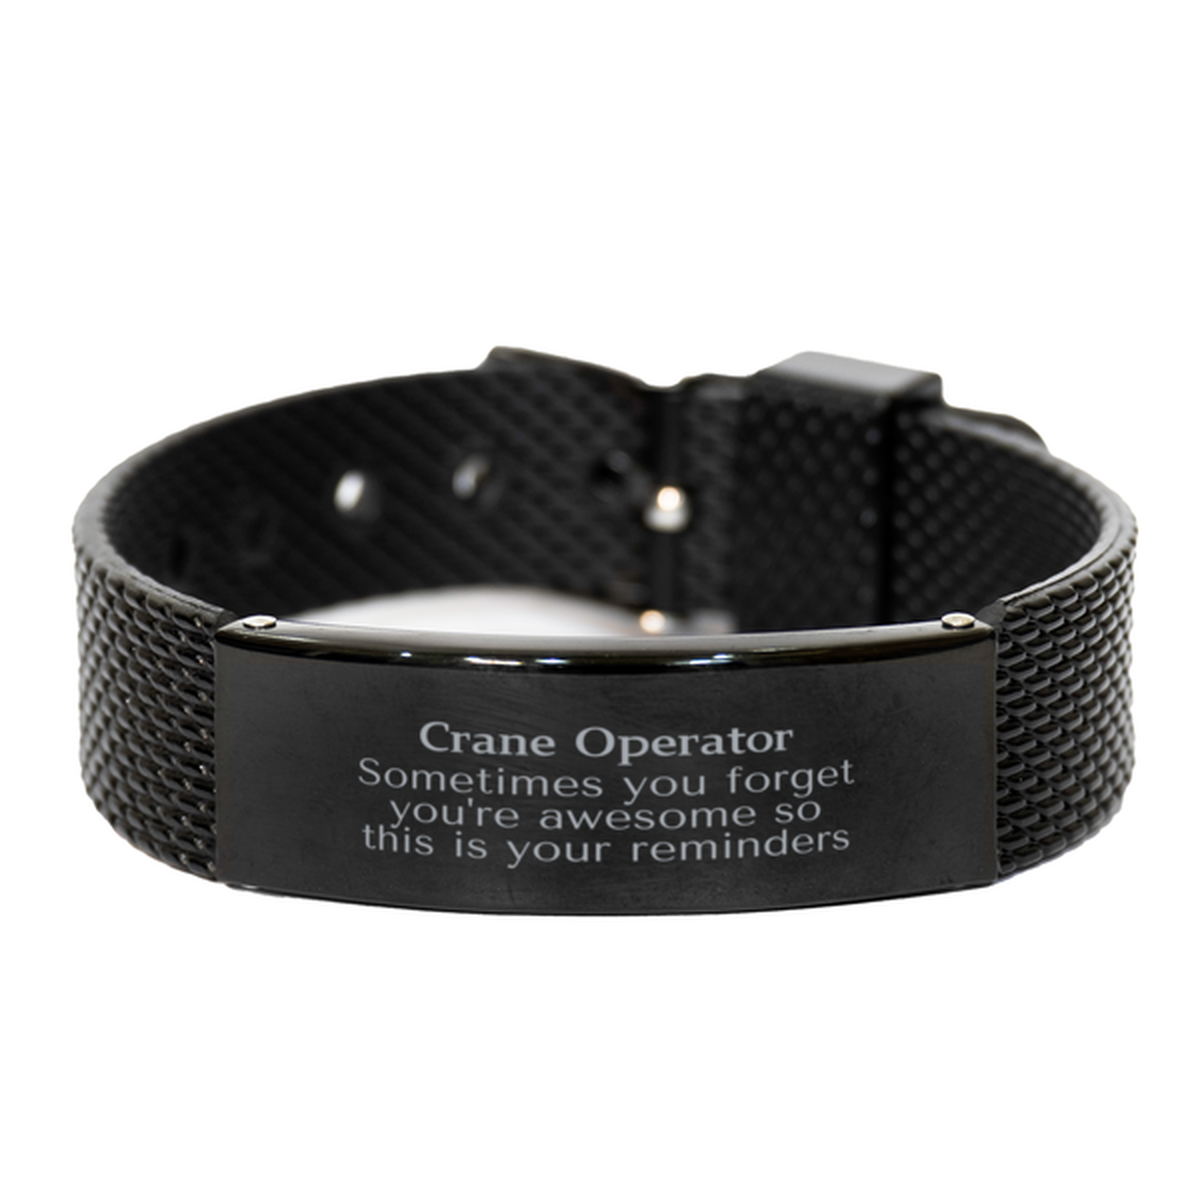 Sentimental Crane Operator Black Shark Mesh Bracelet, Crane Operator Sometimes you forget you're awesome so this is your reminders, Graduation Christmas Birthday Gifts for Crane Operator, Men, Women, Coworkers